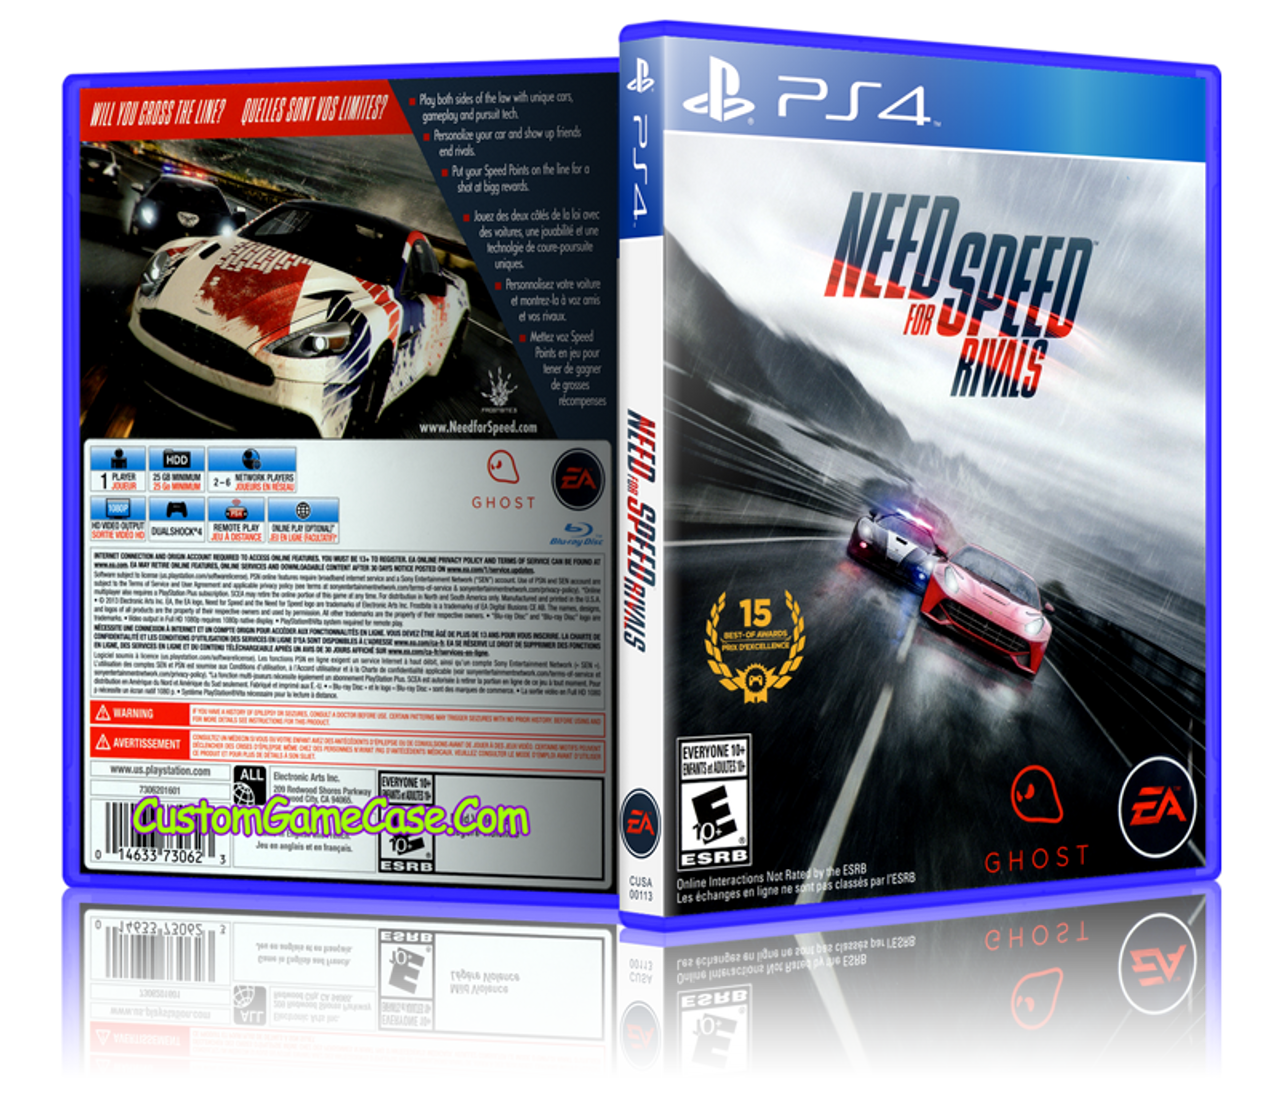 Rivals ps4. NFS Rivals ps3 обложка. Need for Speed Rivals PLAYSTATION 4. Игровые диски ps4 NFS. NFS Rivals ps4.